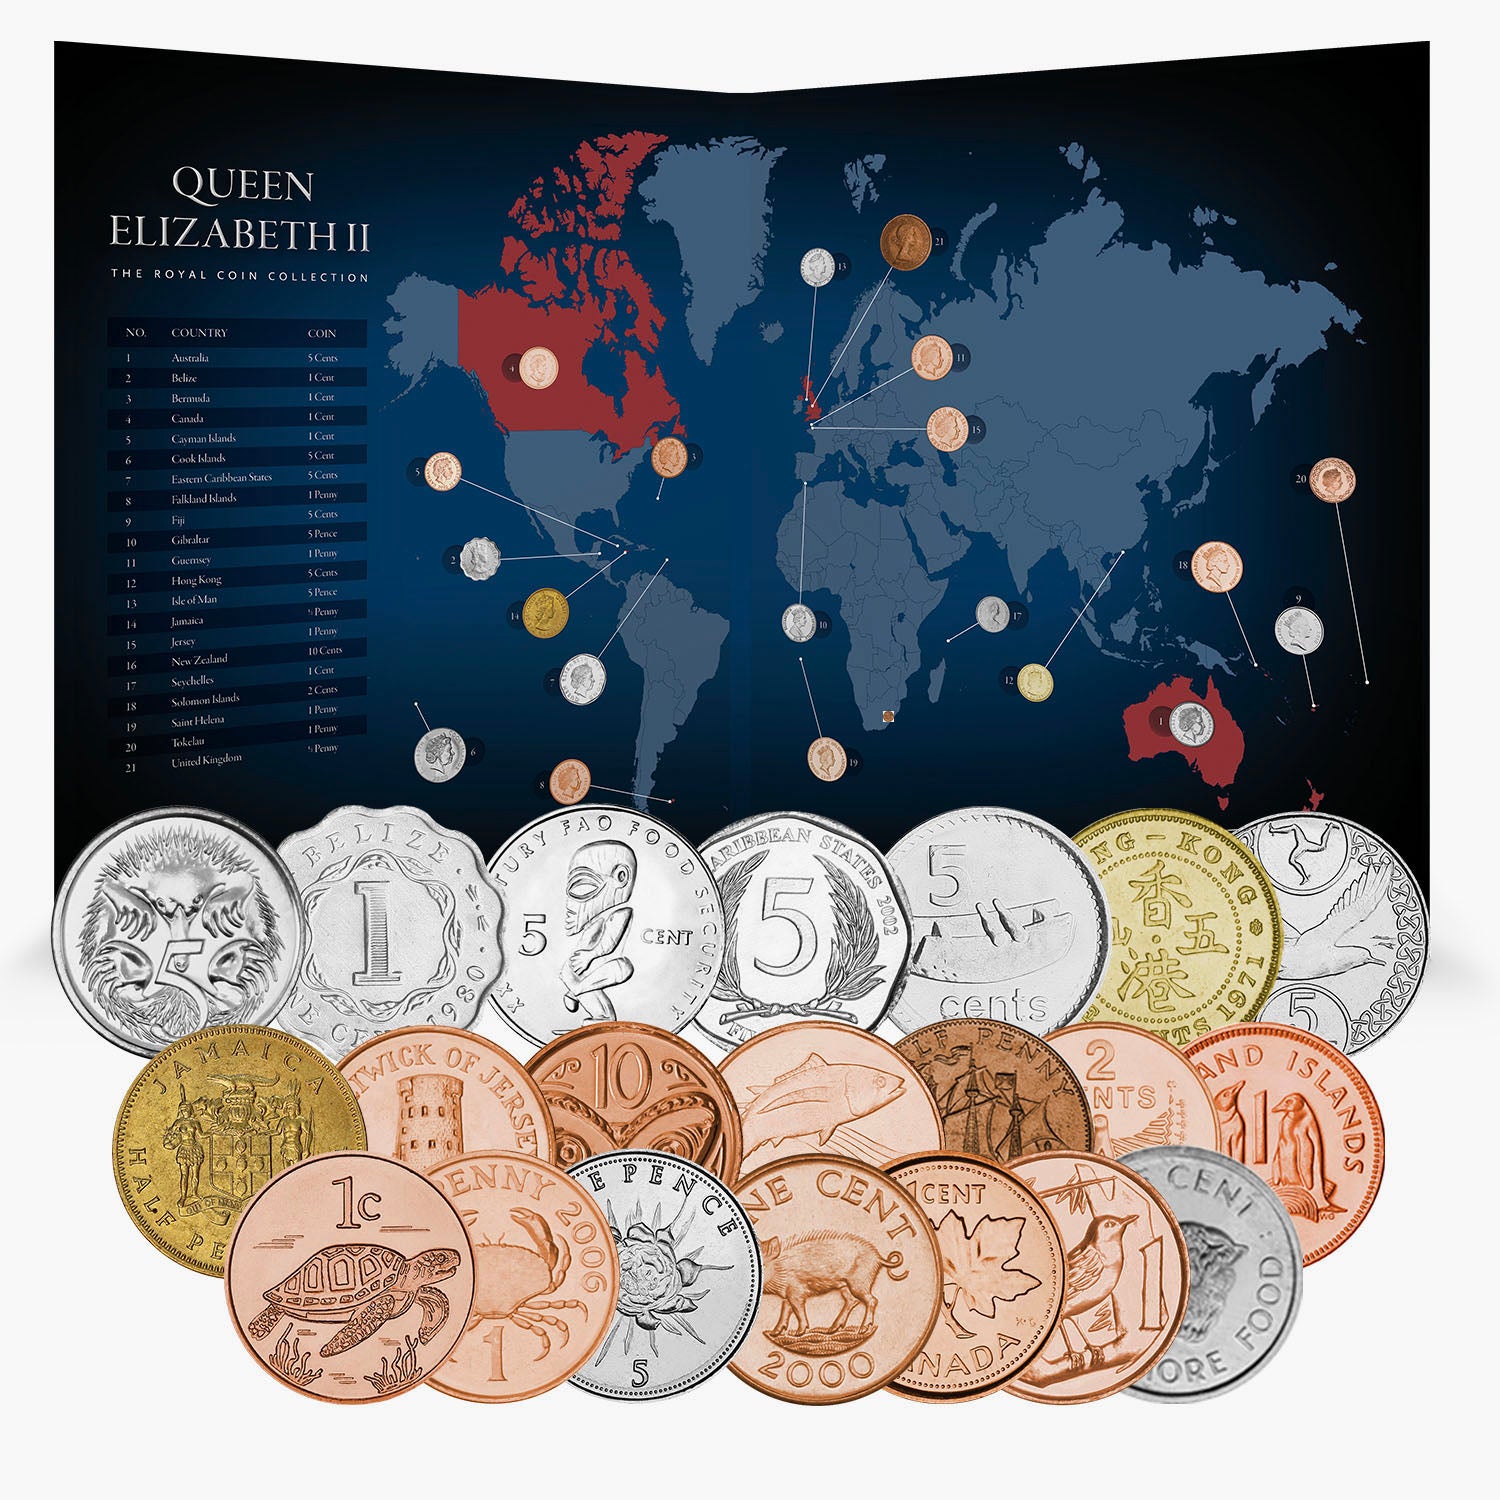 Her Majesty Queen Elizabeth II Coins from the Commonwealth Collectors Edition